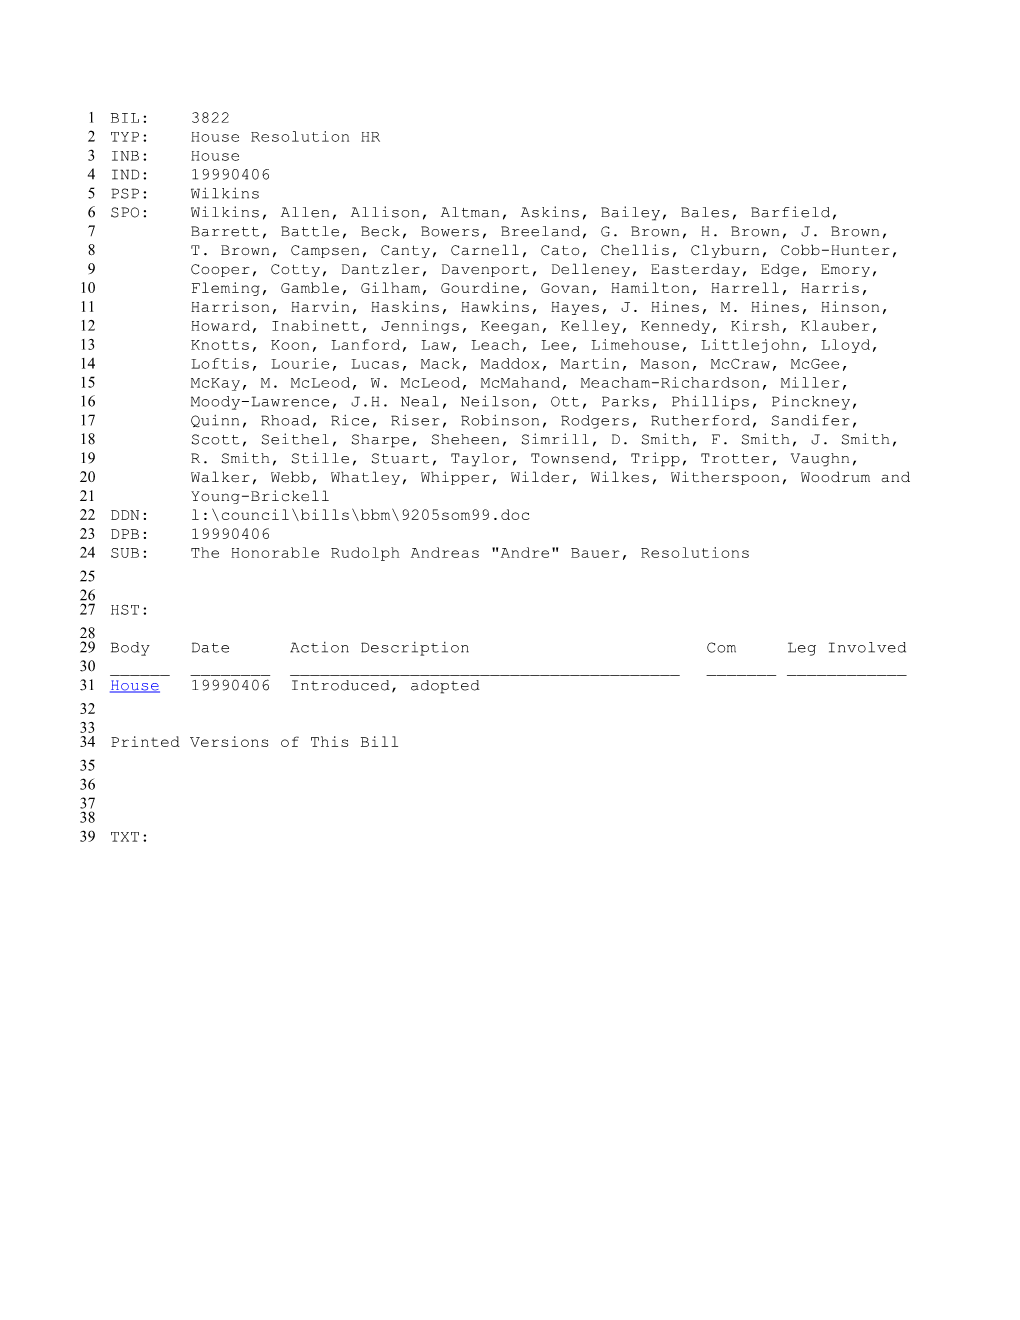 1999-2000 Bill 3822: the Honorable Rudolph Andreas Andre Bauer, Resolutions - South Carolina